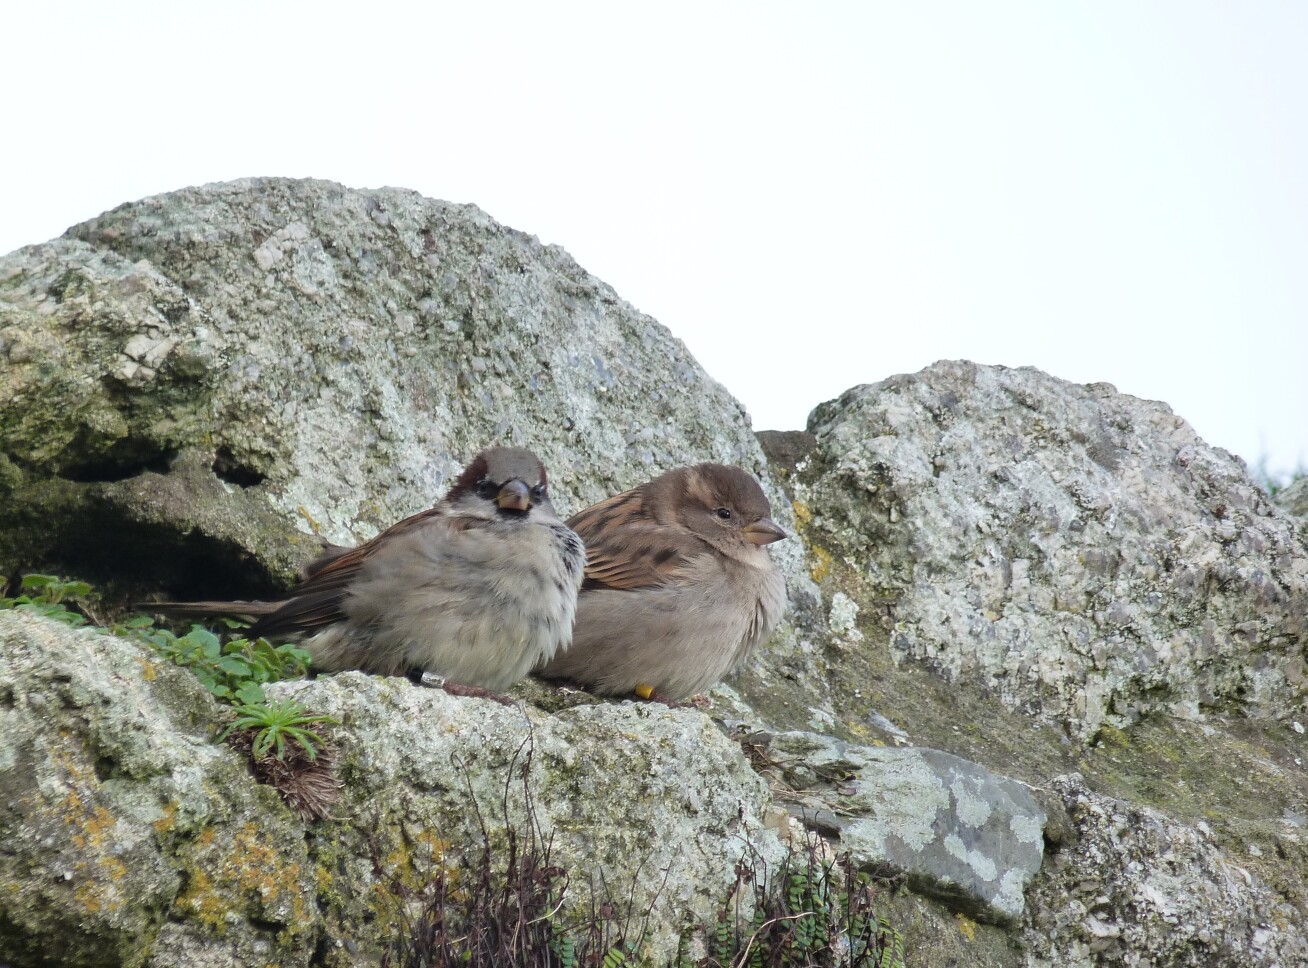 A male and female sparrow sitting together on a rock